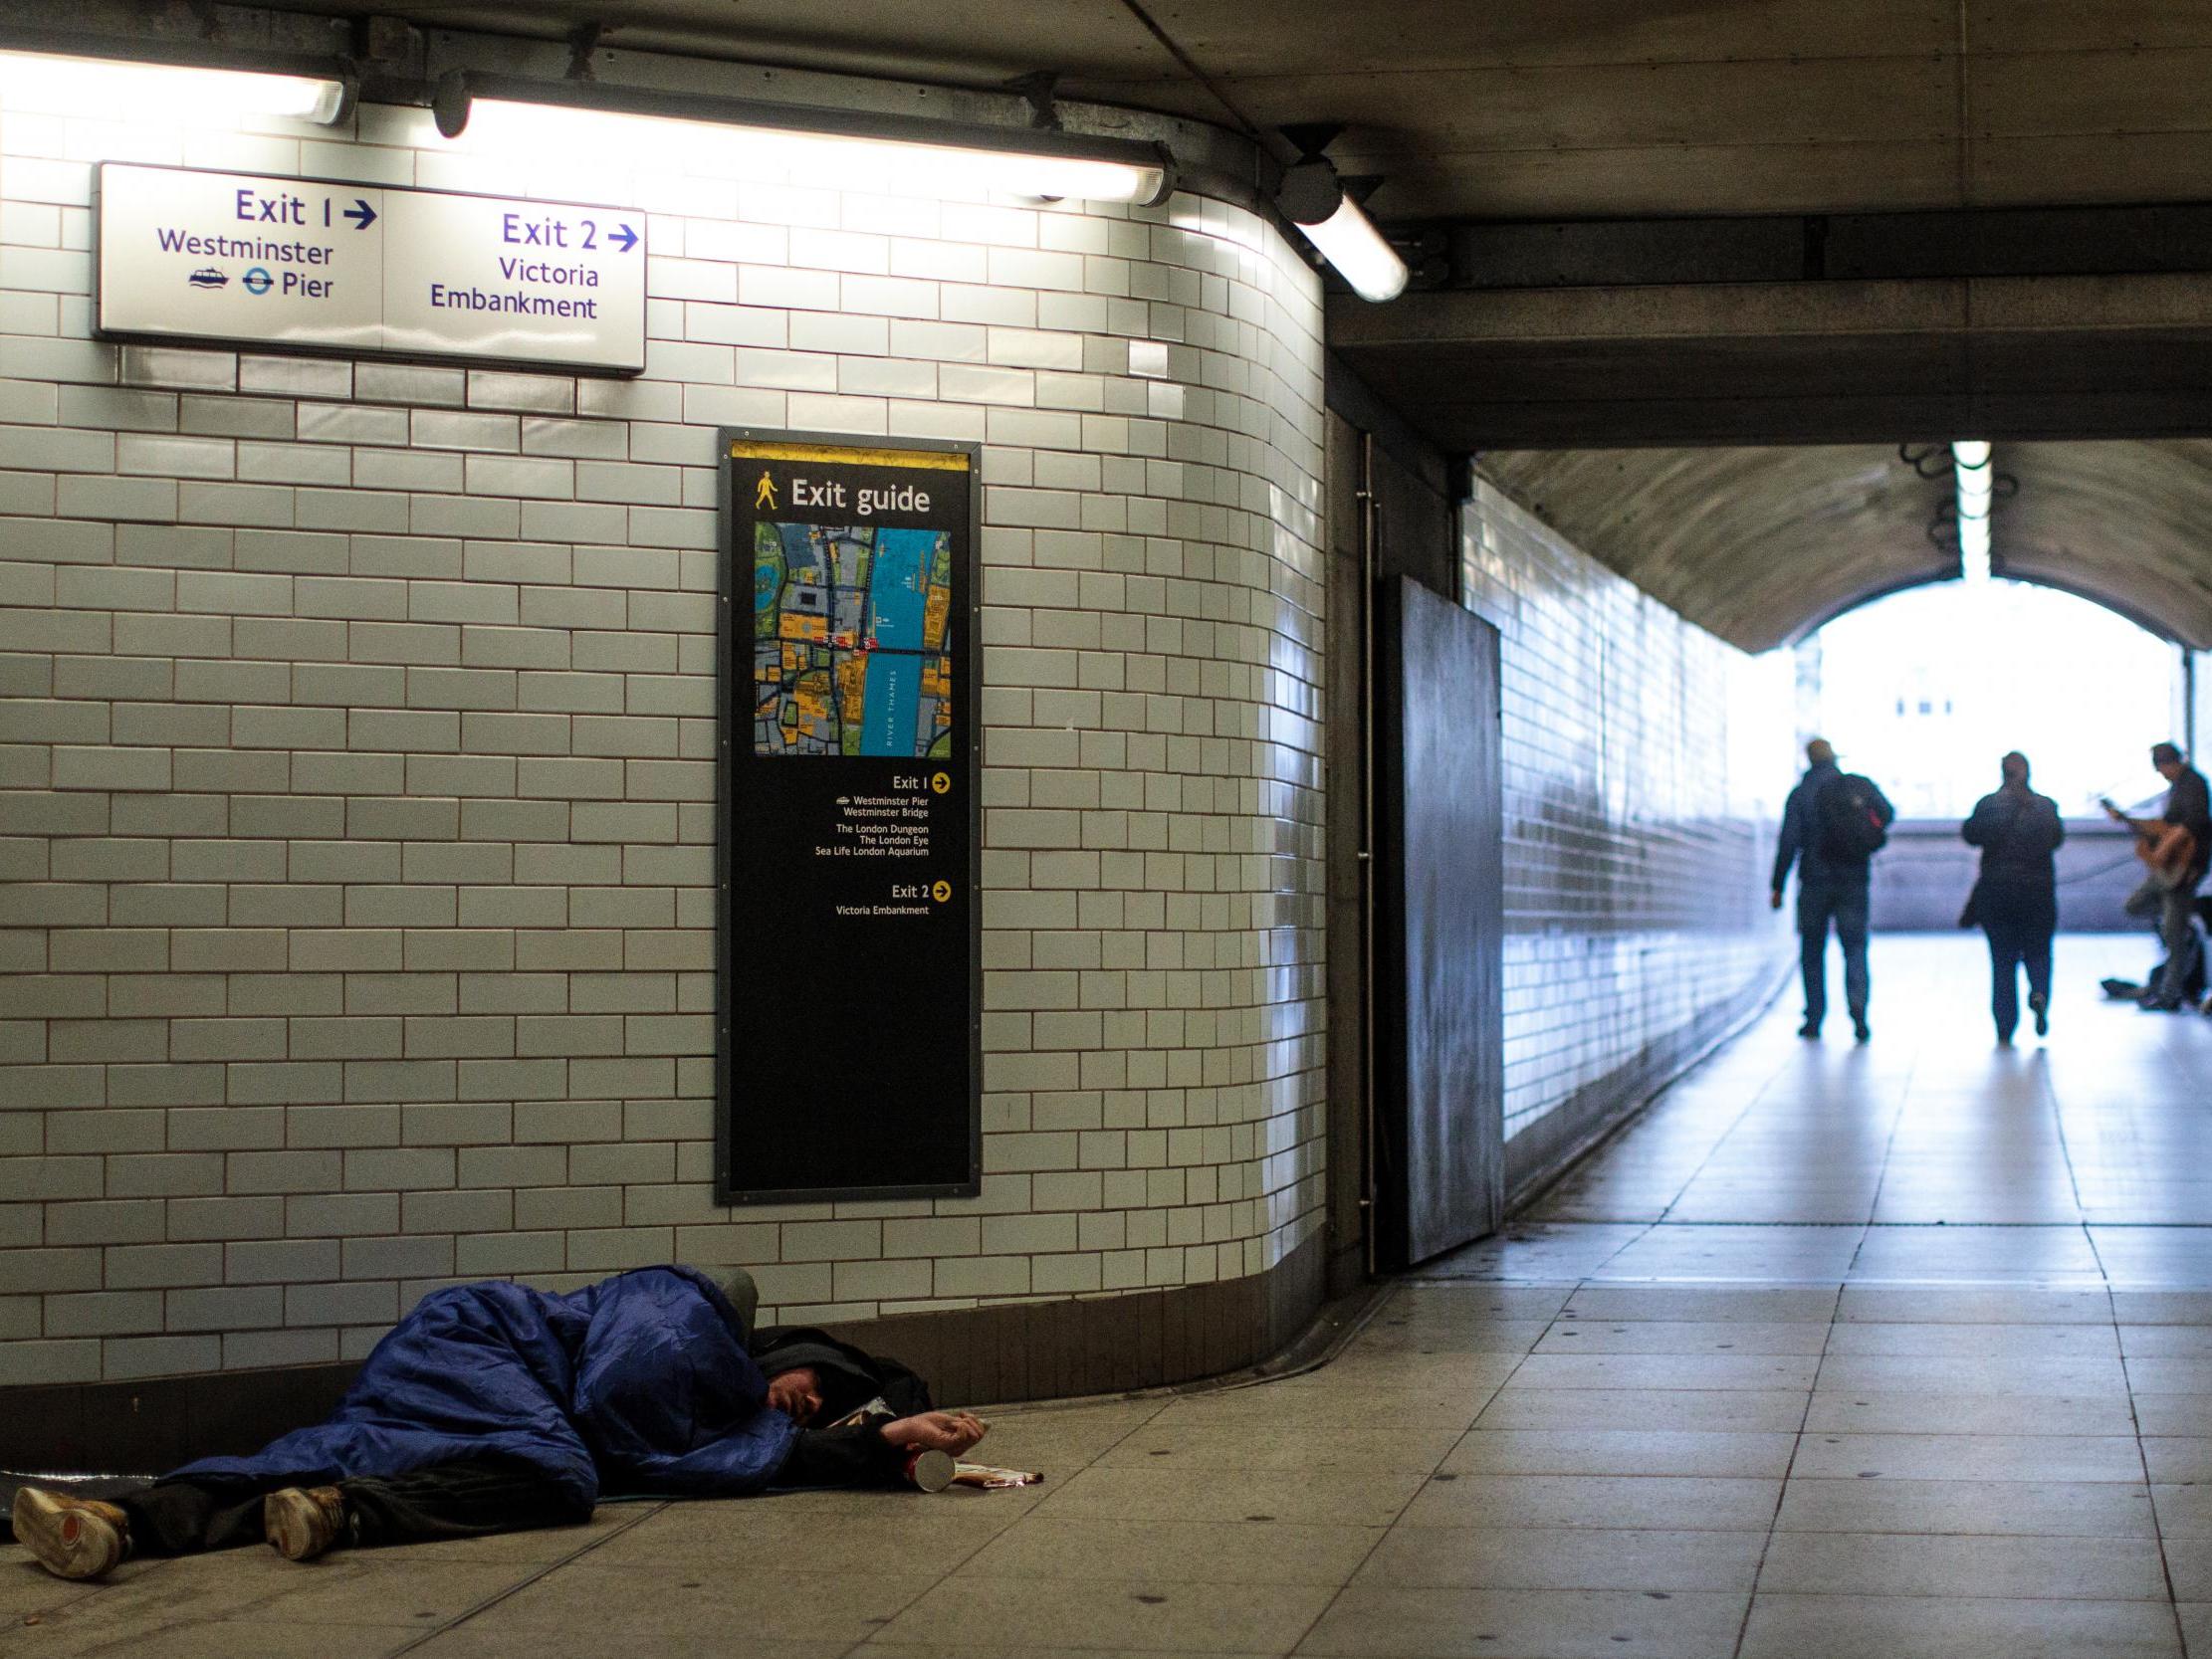 Westminster tube station tunnels have been used by rough sleepers